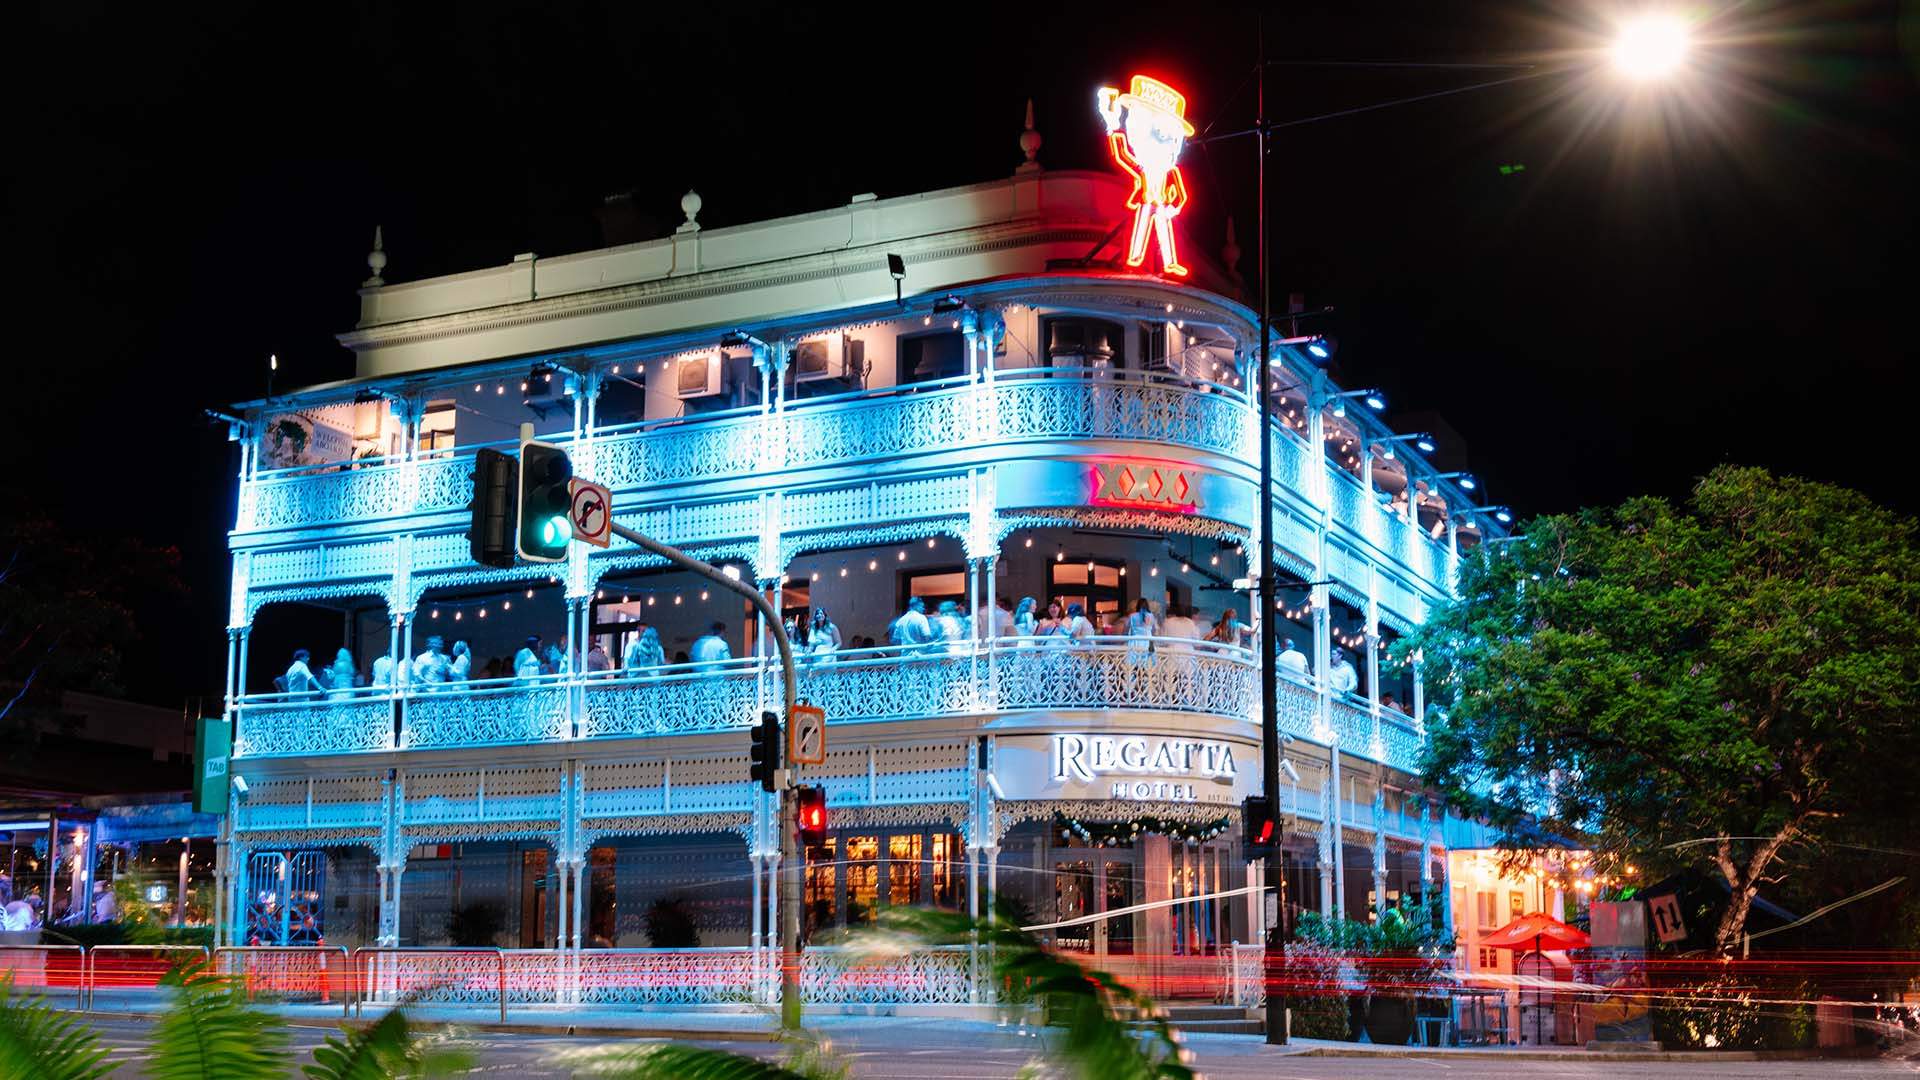 A view of the Regatta Hotel lit up at night - one of the best sports bars in Brisbane